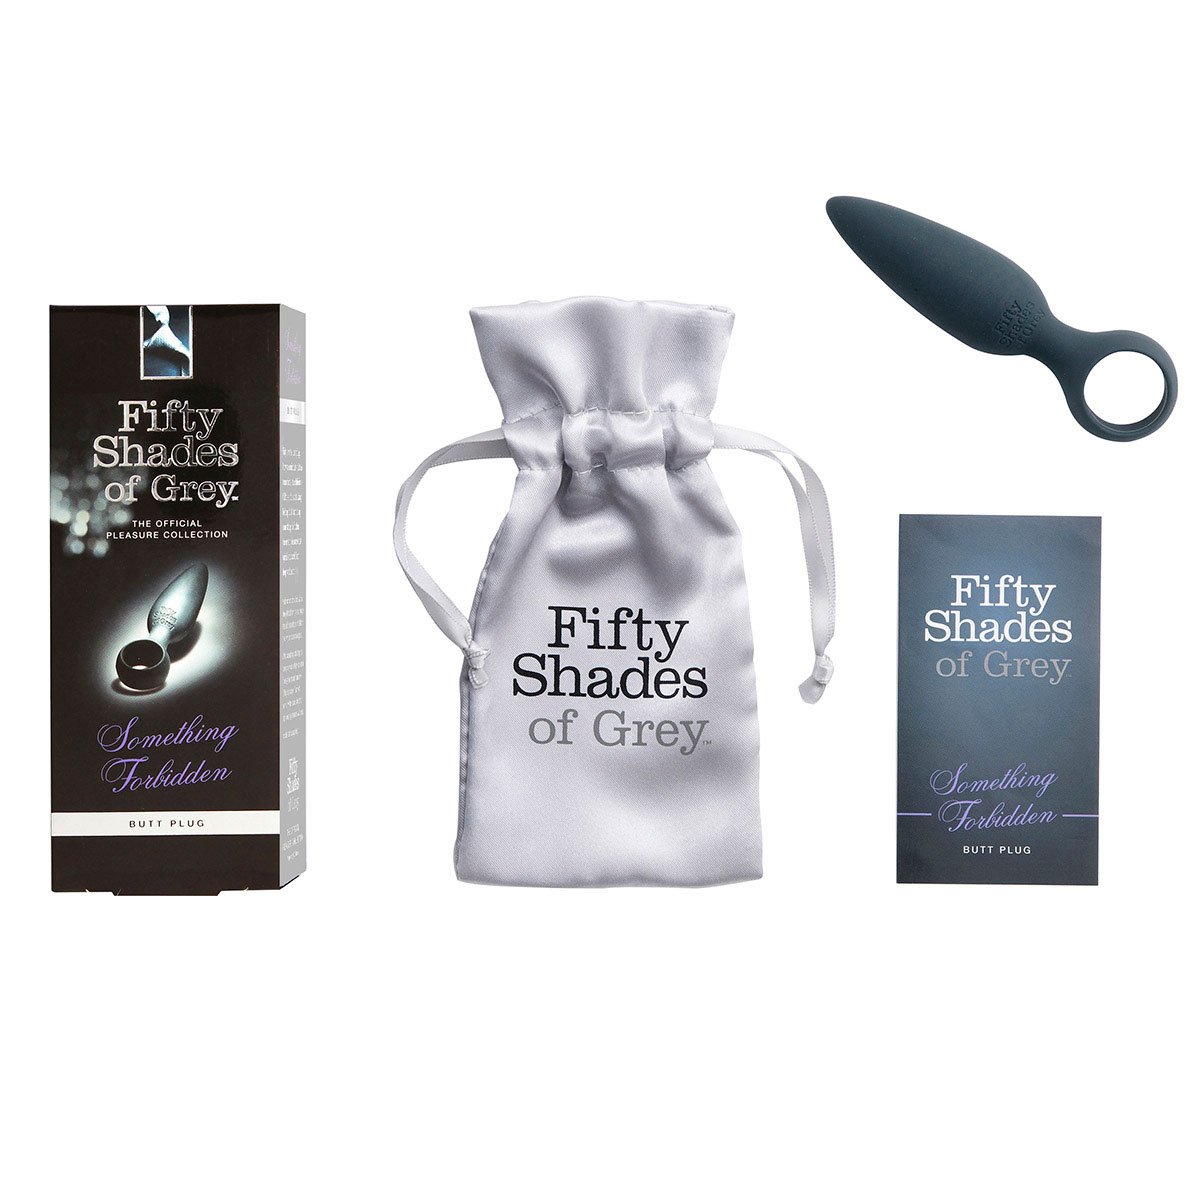 Fifty Shades Something Forbidden Butt Plug - Buy At Luxury Toy X - Free 3-Day Shipping